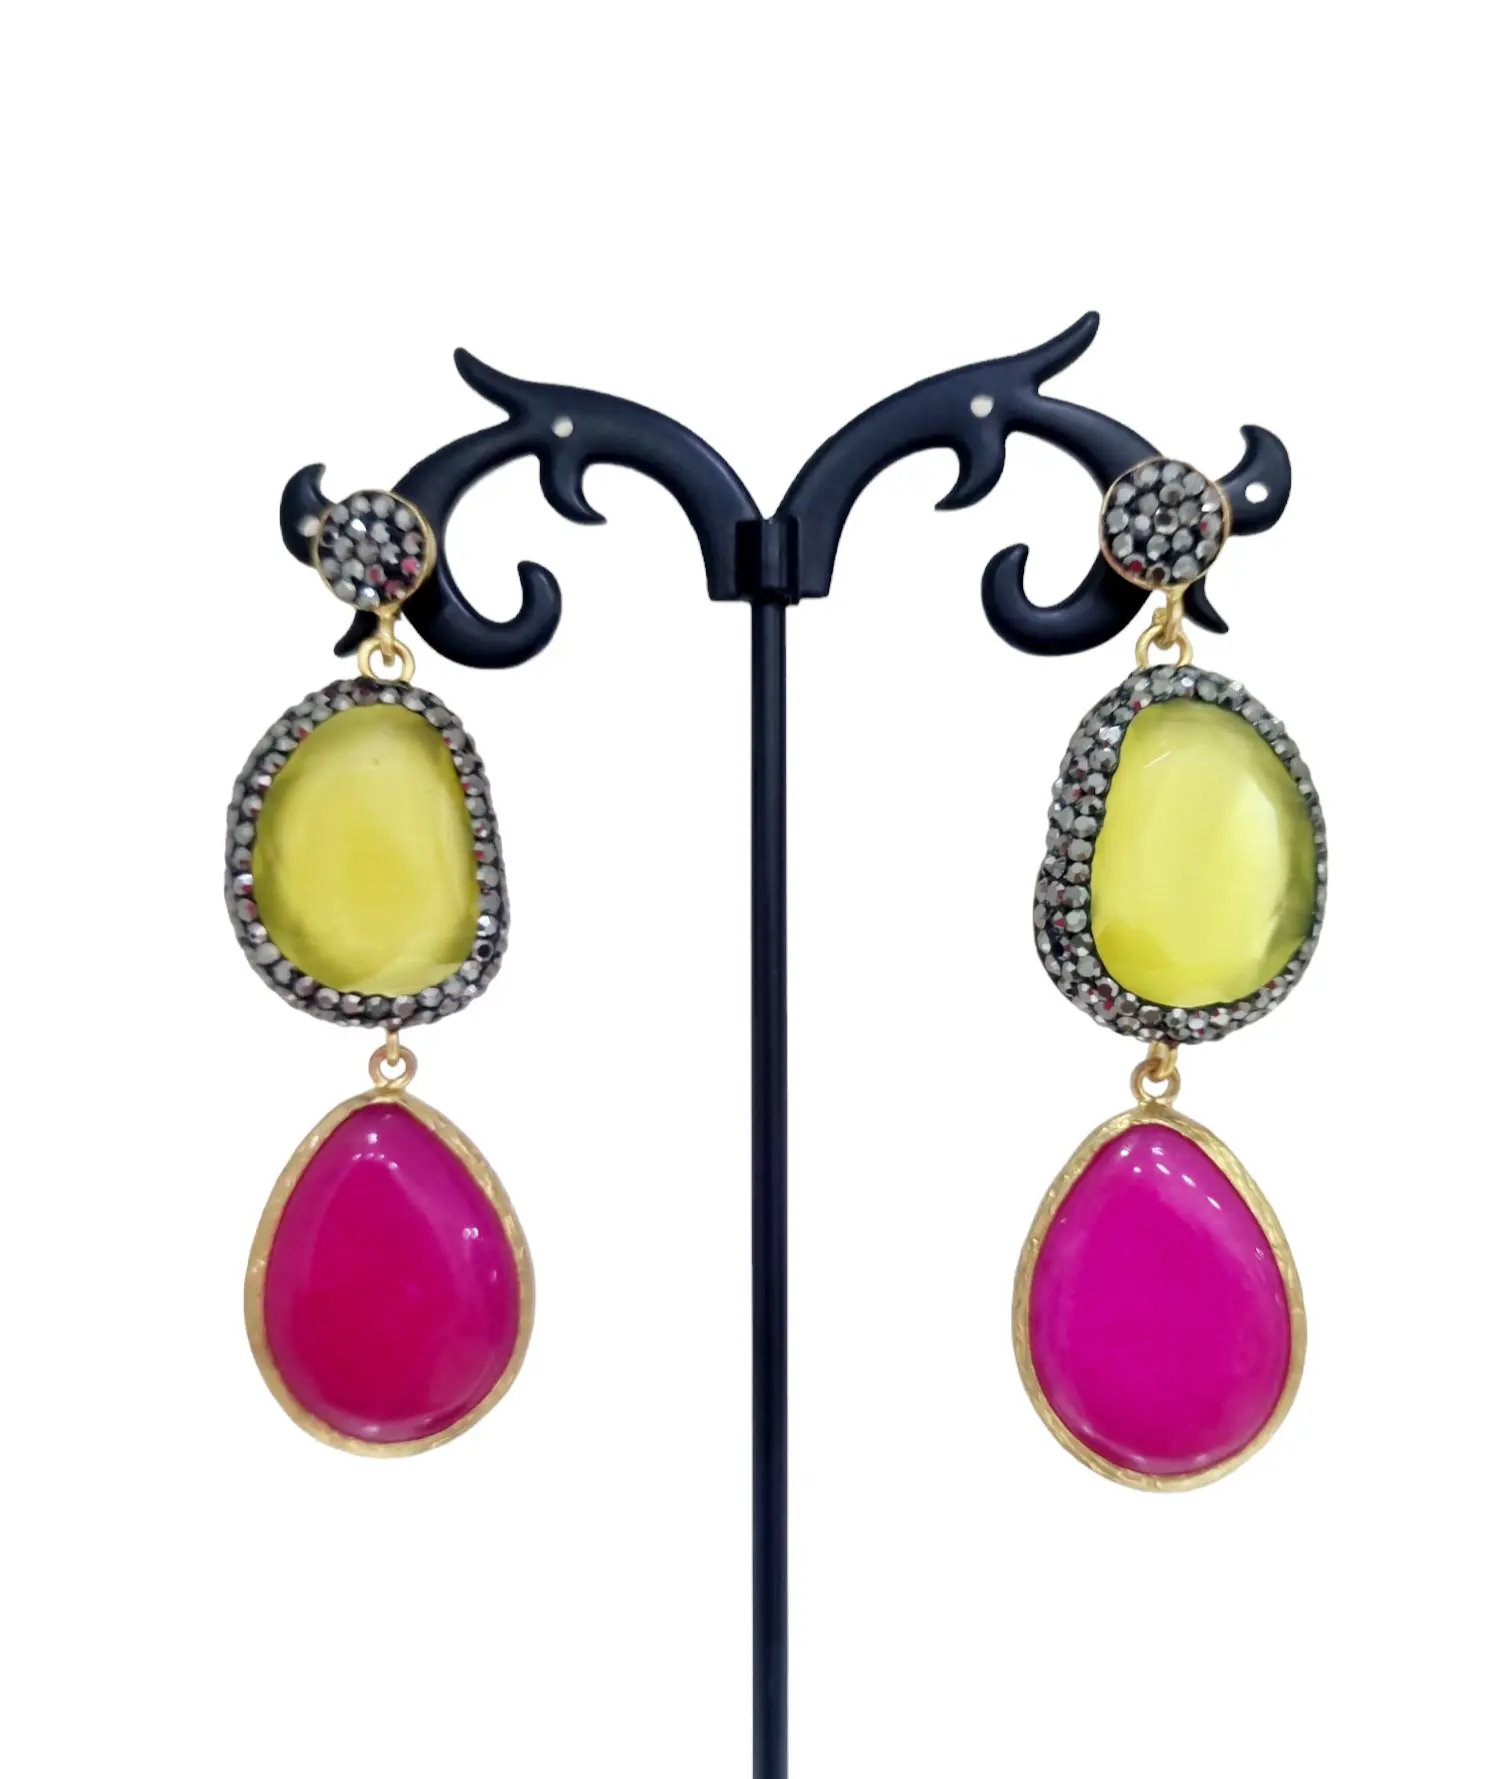 Earrings with cat's eye, Marcasite and agate – Length 6.5cm, Weight 11.6gr